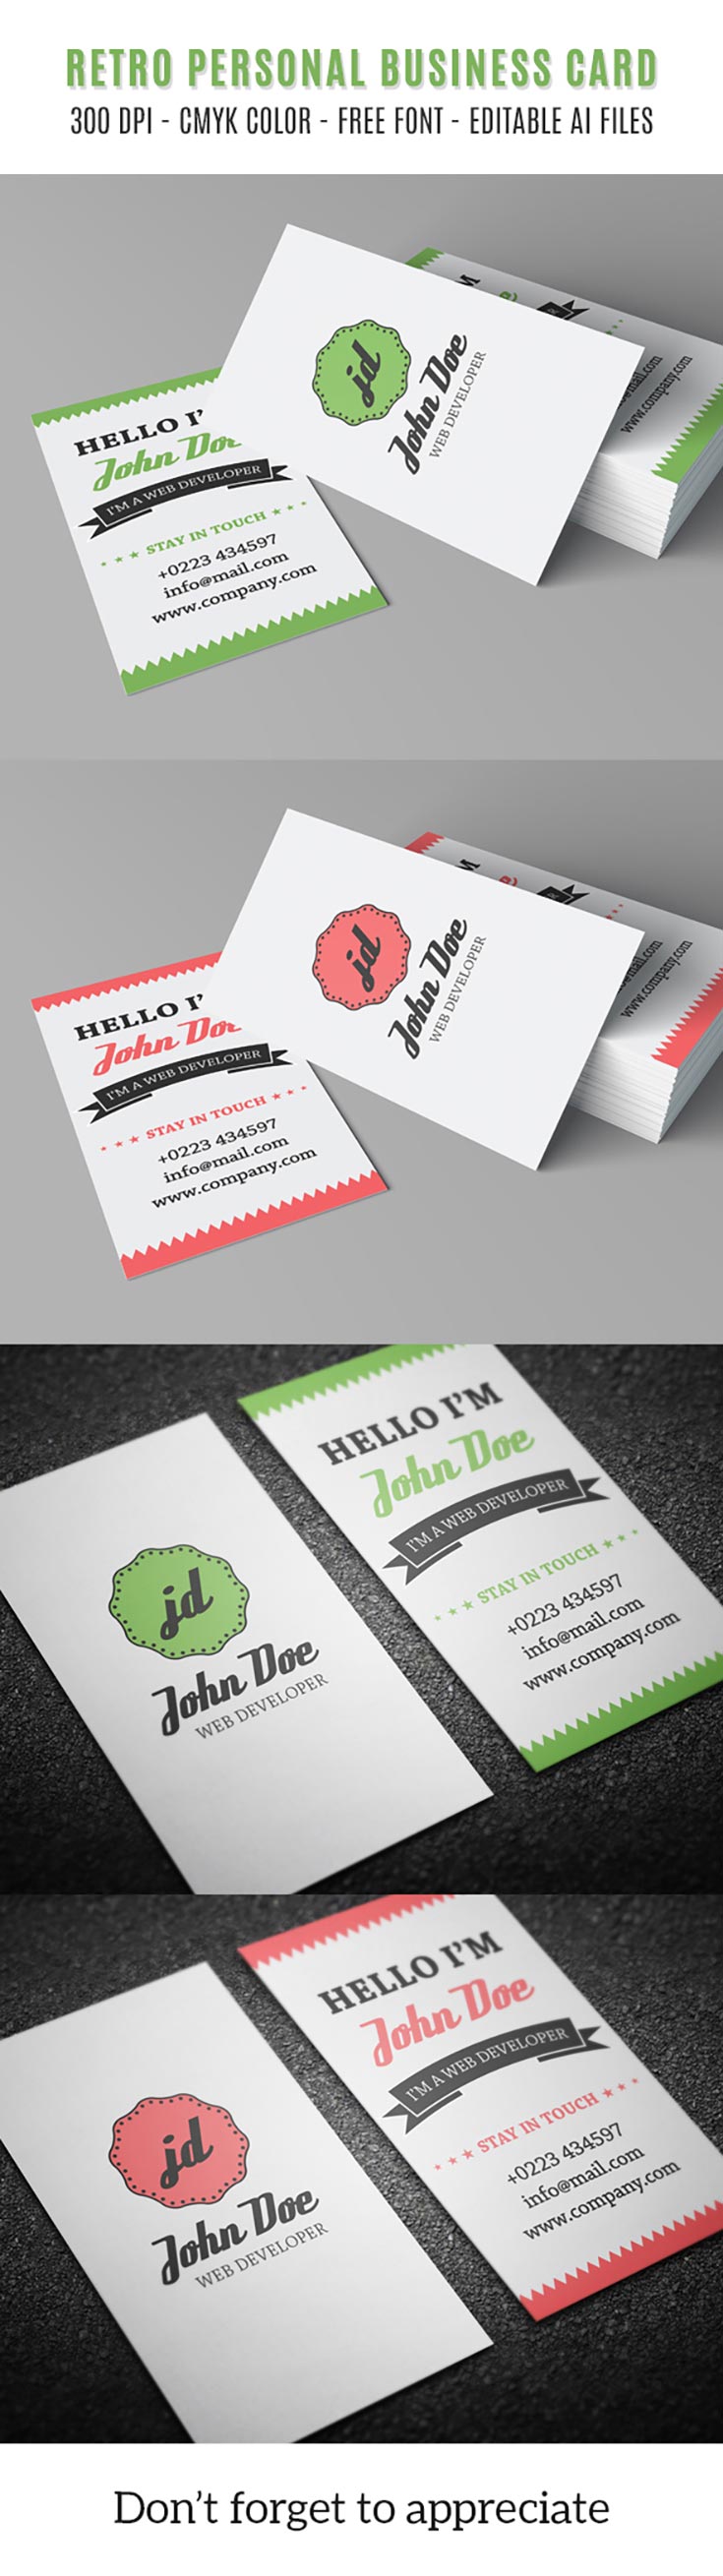 Free Retro Personal Business Card